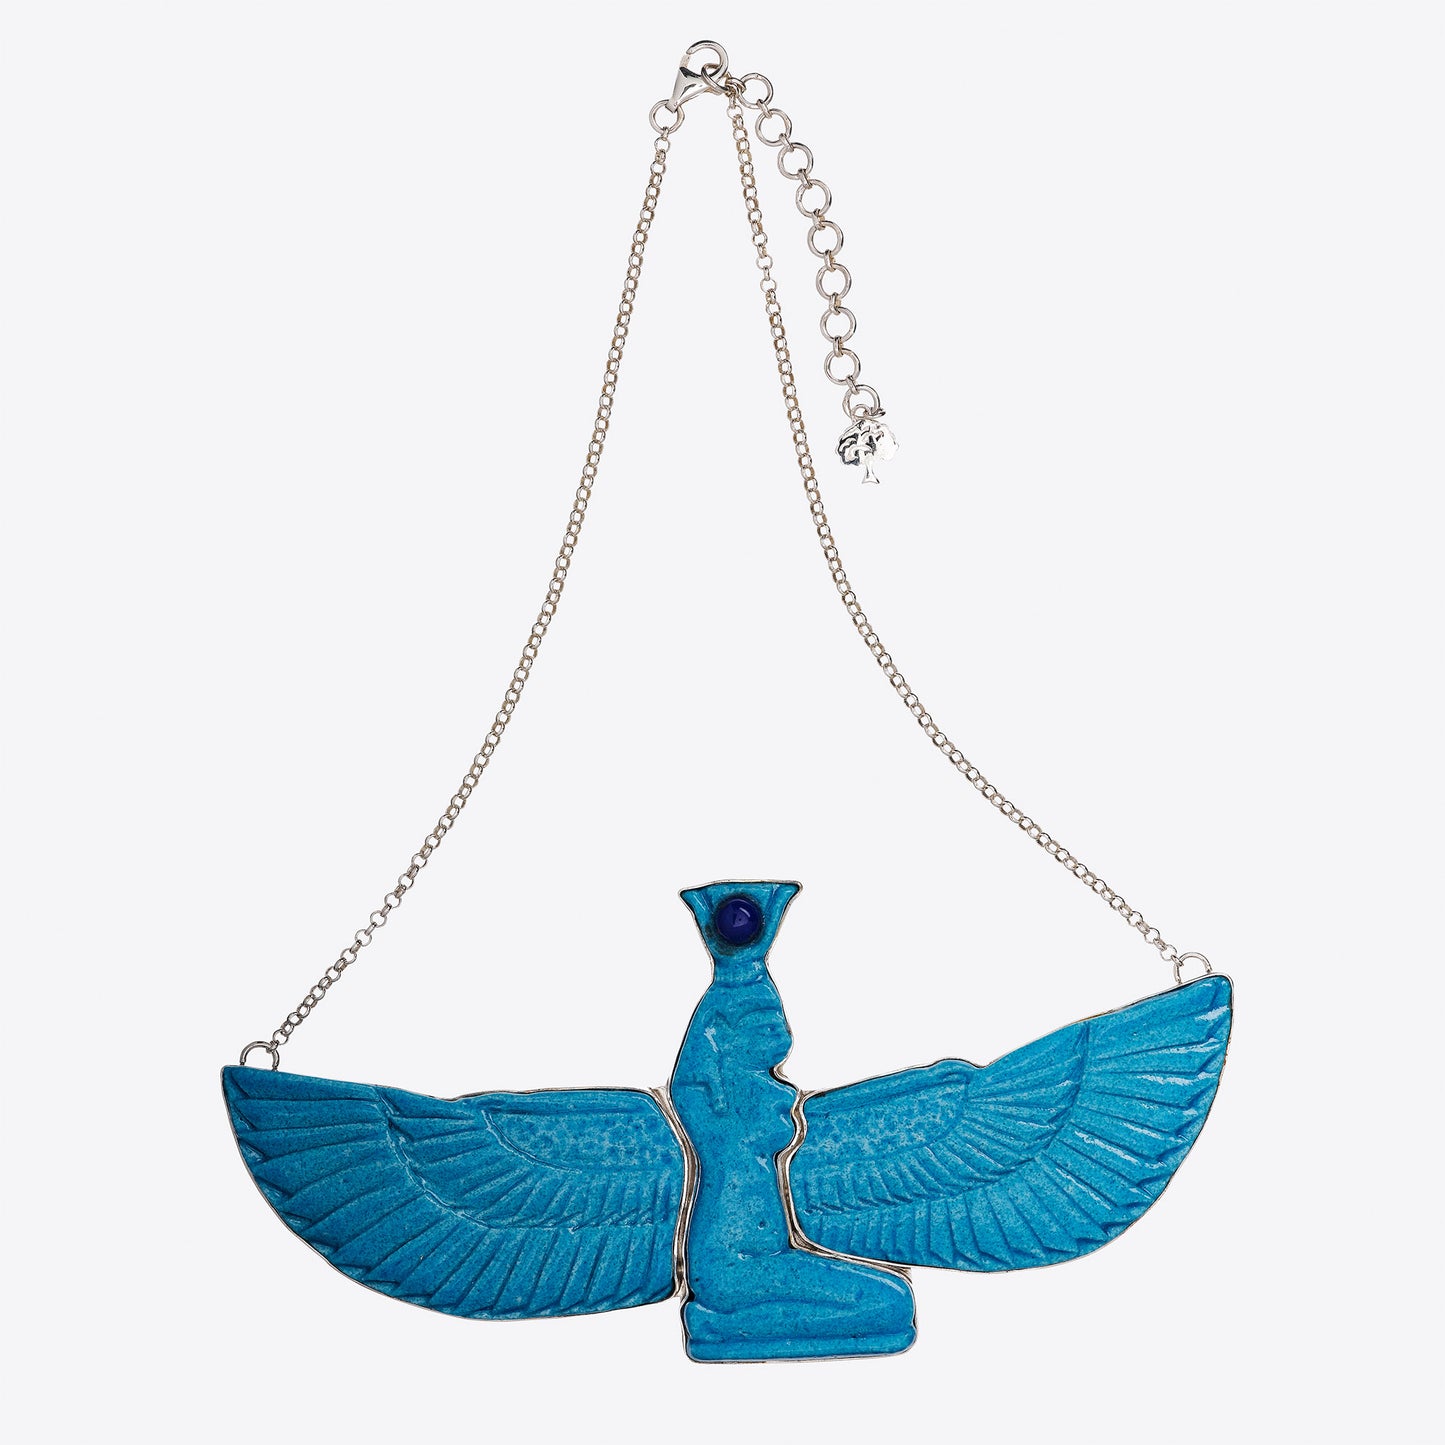 Goddess Isis Necklace